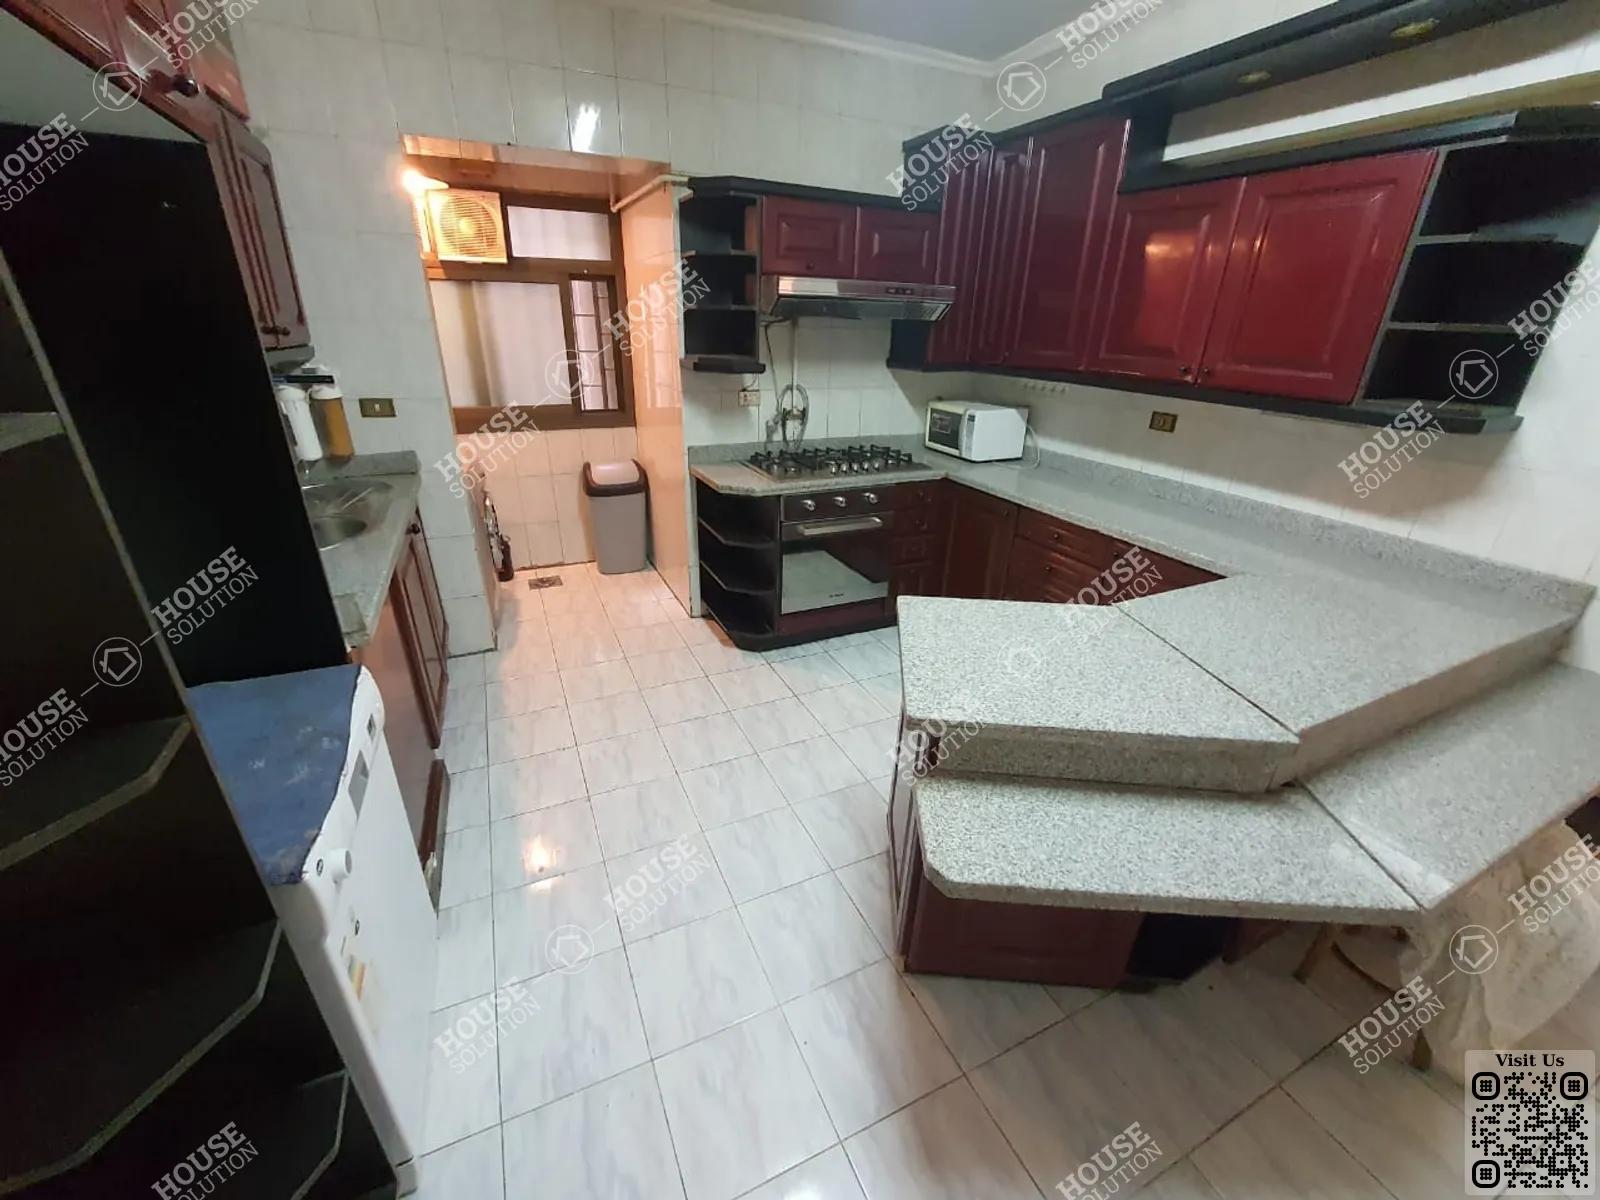 KITCHEN  @ Apartments For Rent In Maadi Maadi Sarayat Area: 200 m² consists of 3 Bedrooms 3 Bathrooms Furnished 4 stars #4136-1